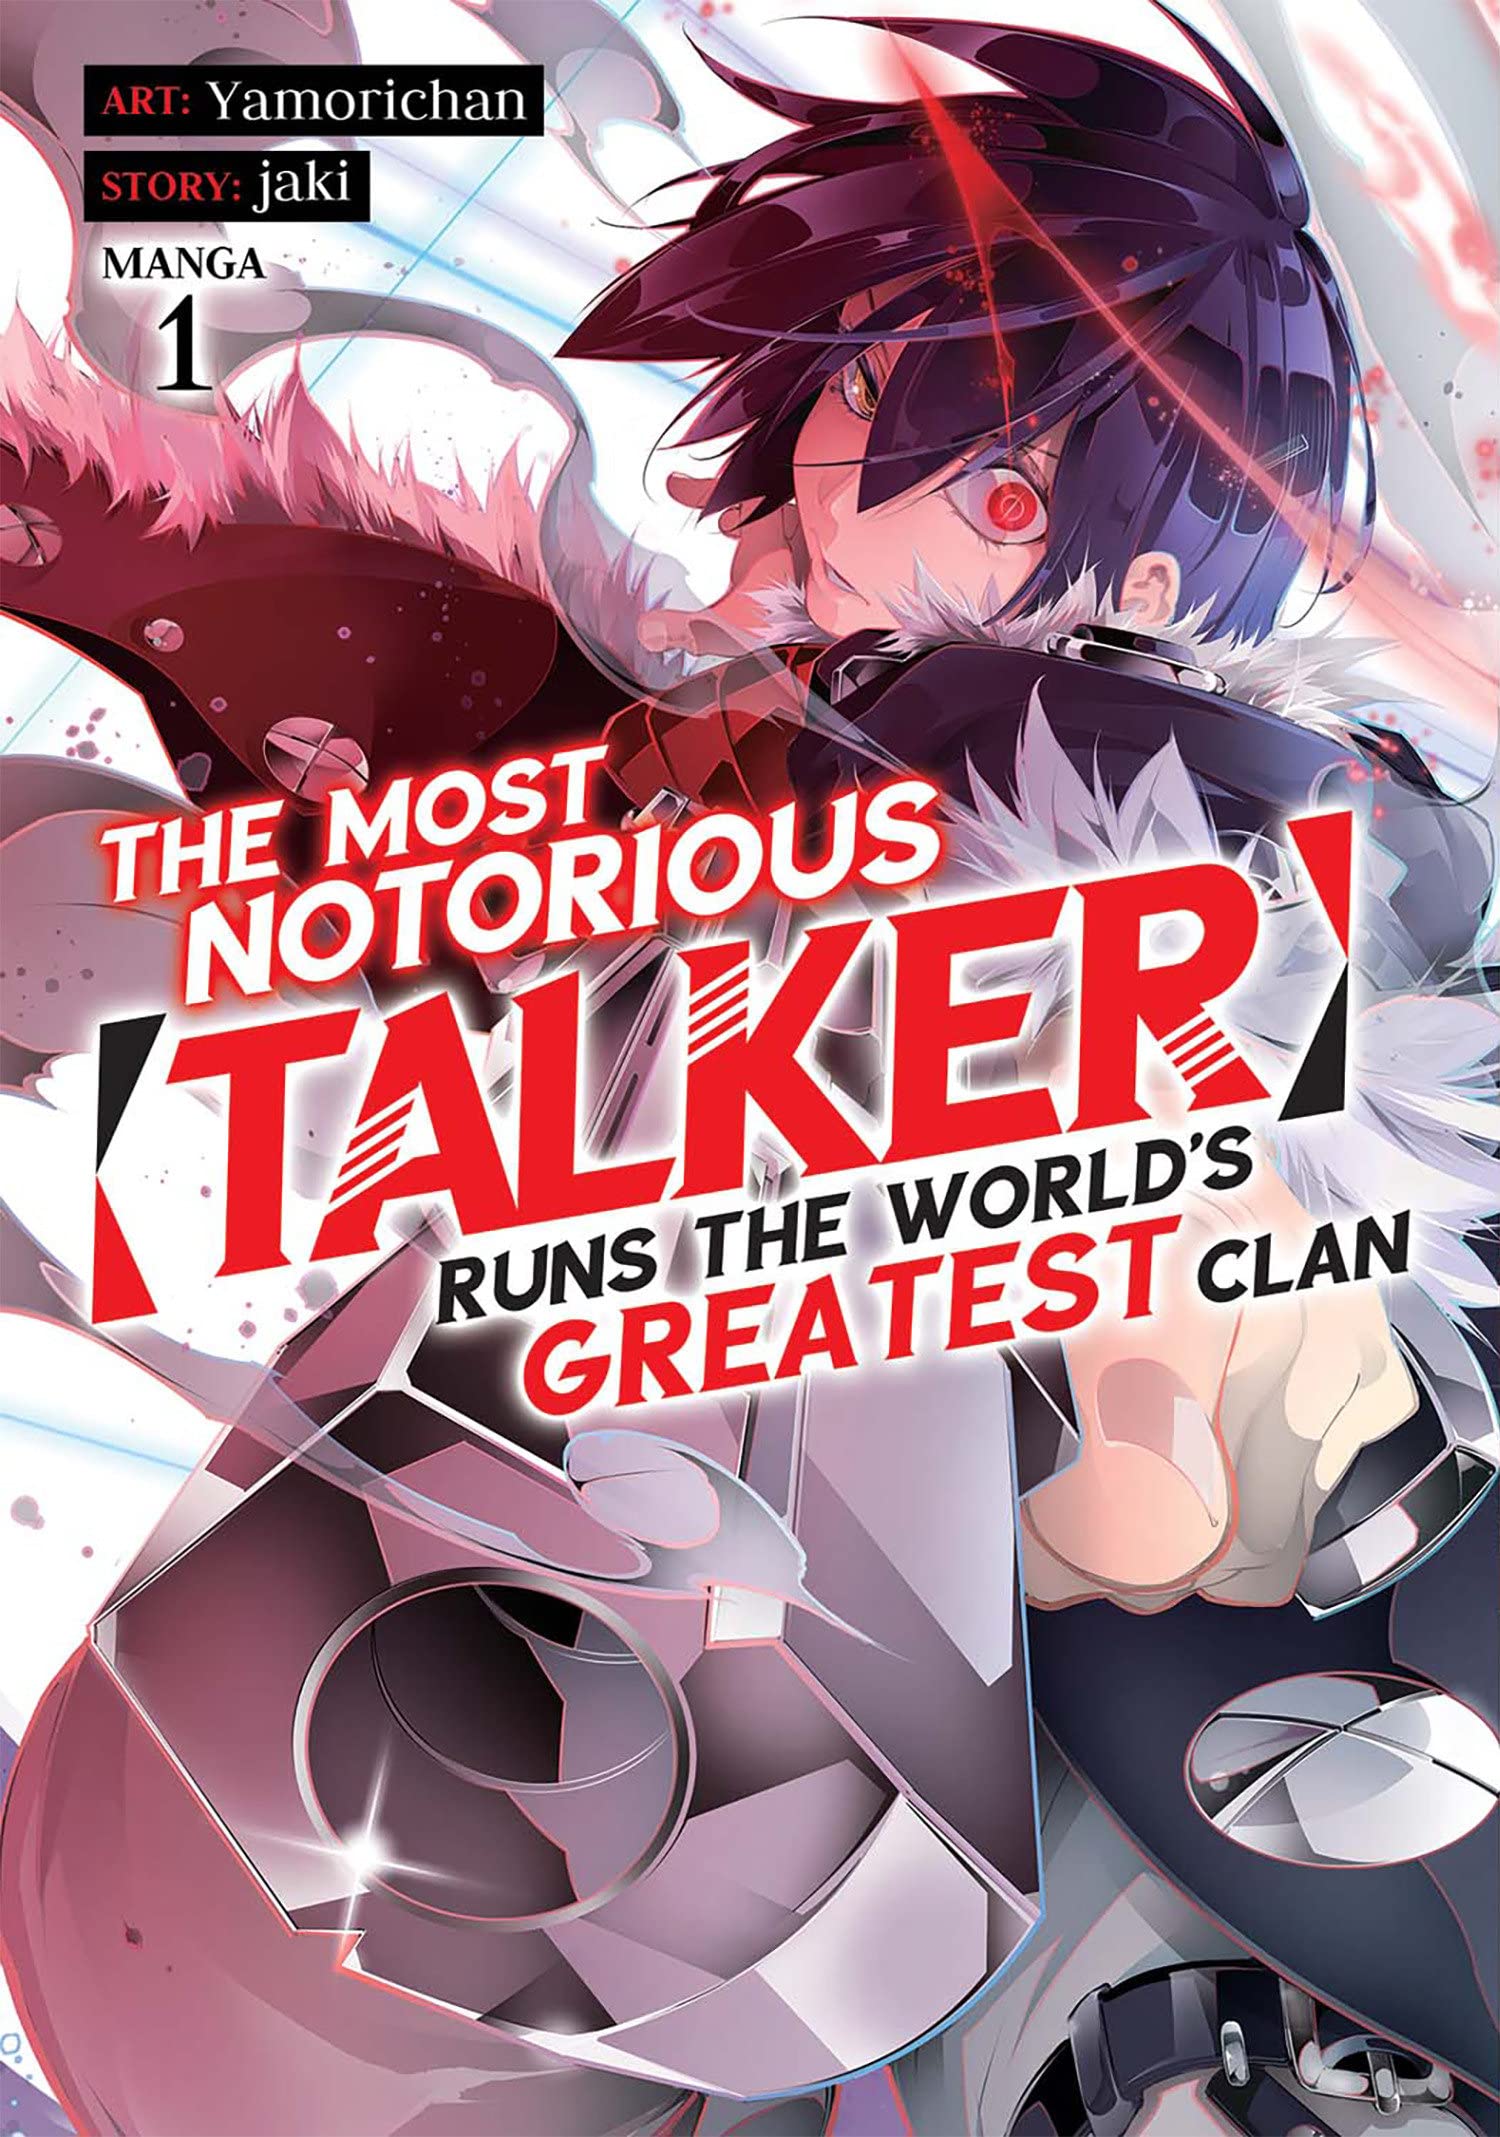 The Most Notorious Talker Runs the Worlds Greatest Clan (Manga) Vol. 01